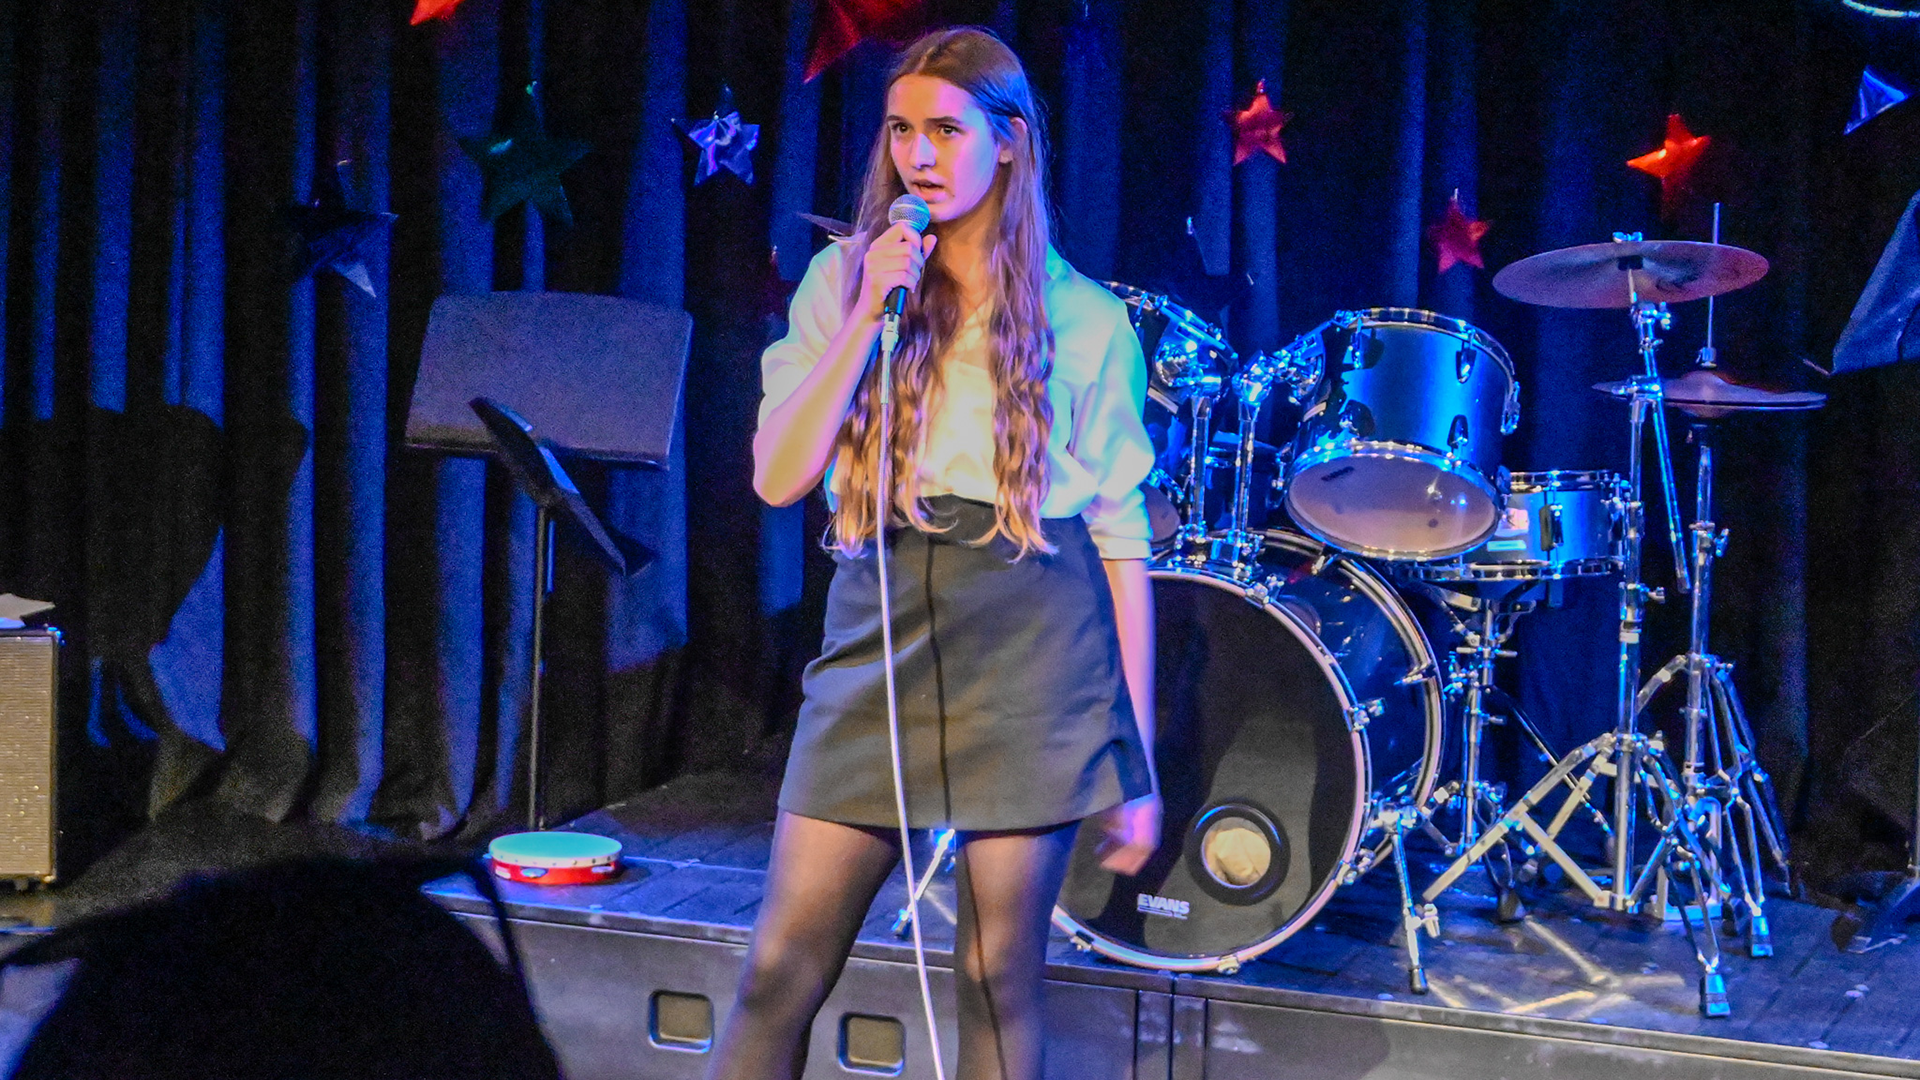 Senior school girl giving a solo performance on stage at the Freemen's LIVE show